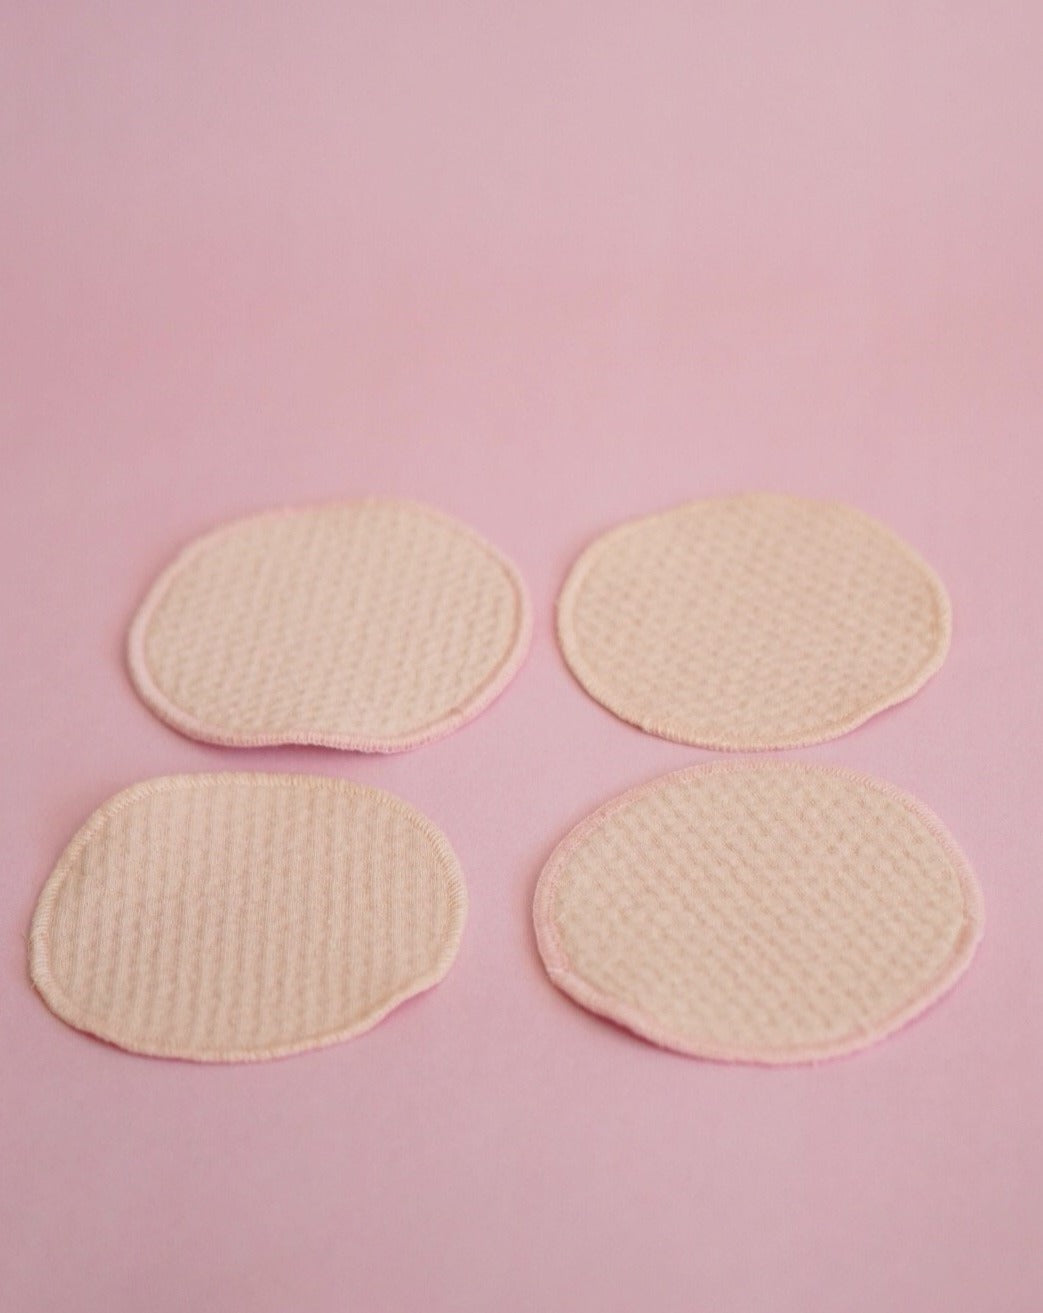 10 Organic Reusable Puffin Breast Pads Cotton & Bamboo 